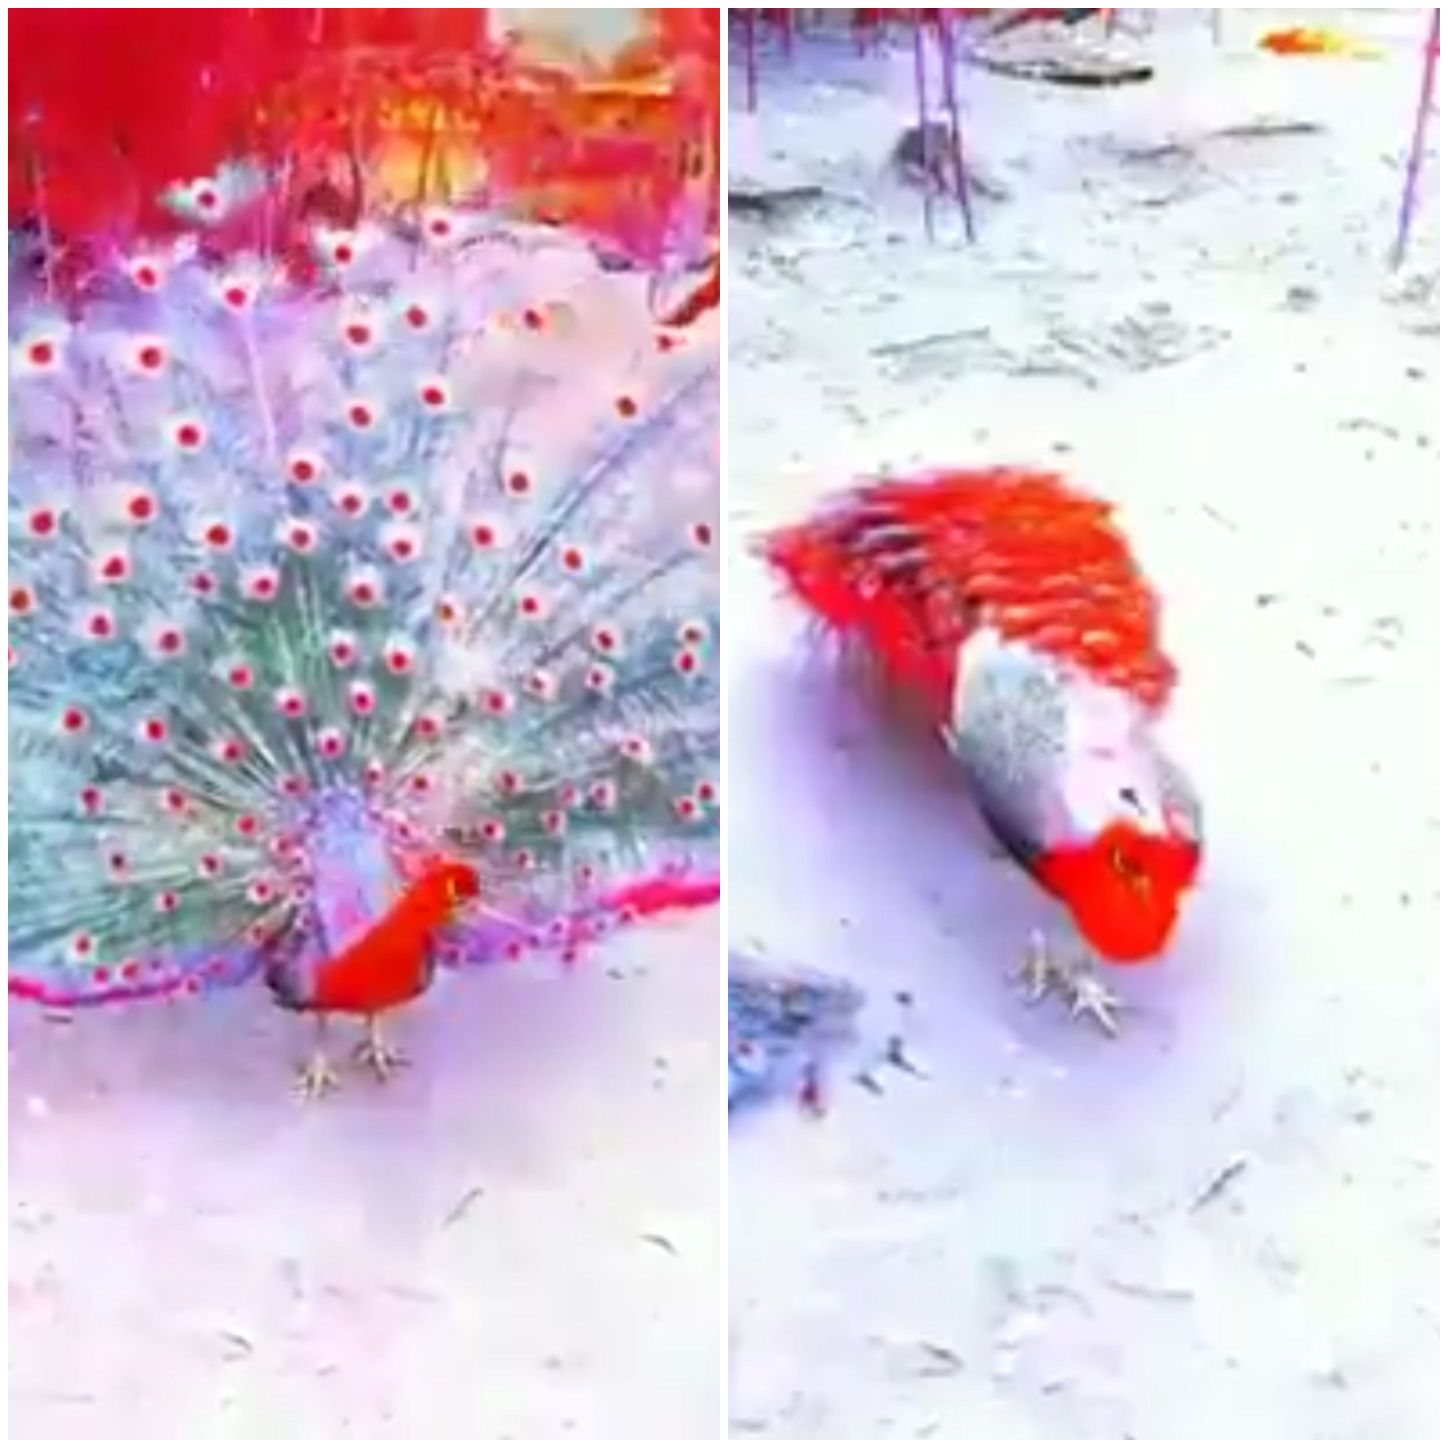 Red Peacock is extremely beautiful -